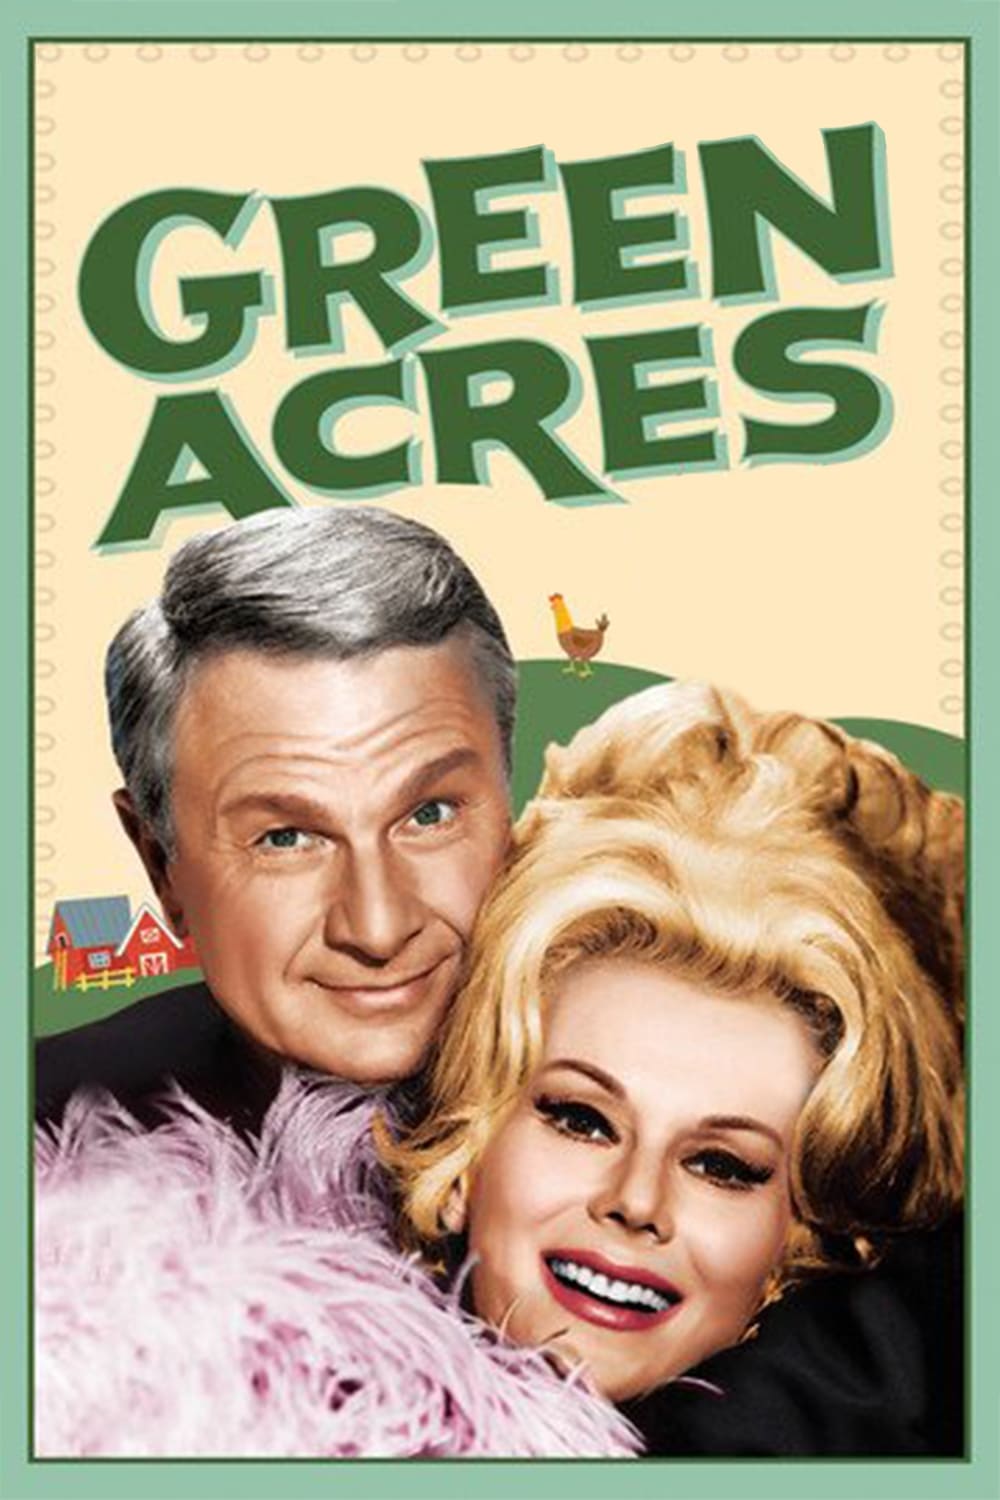 Return To Green Acres